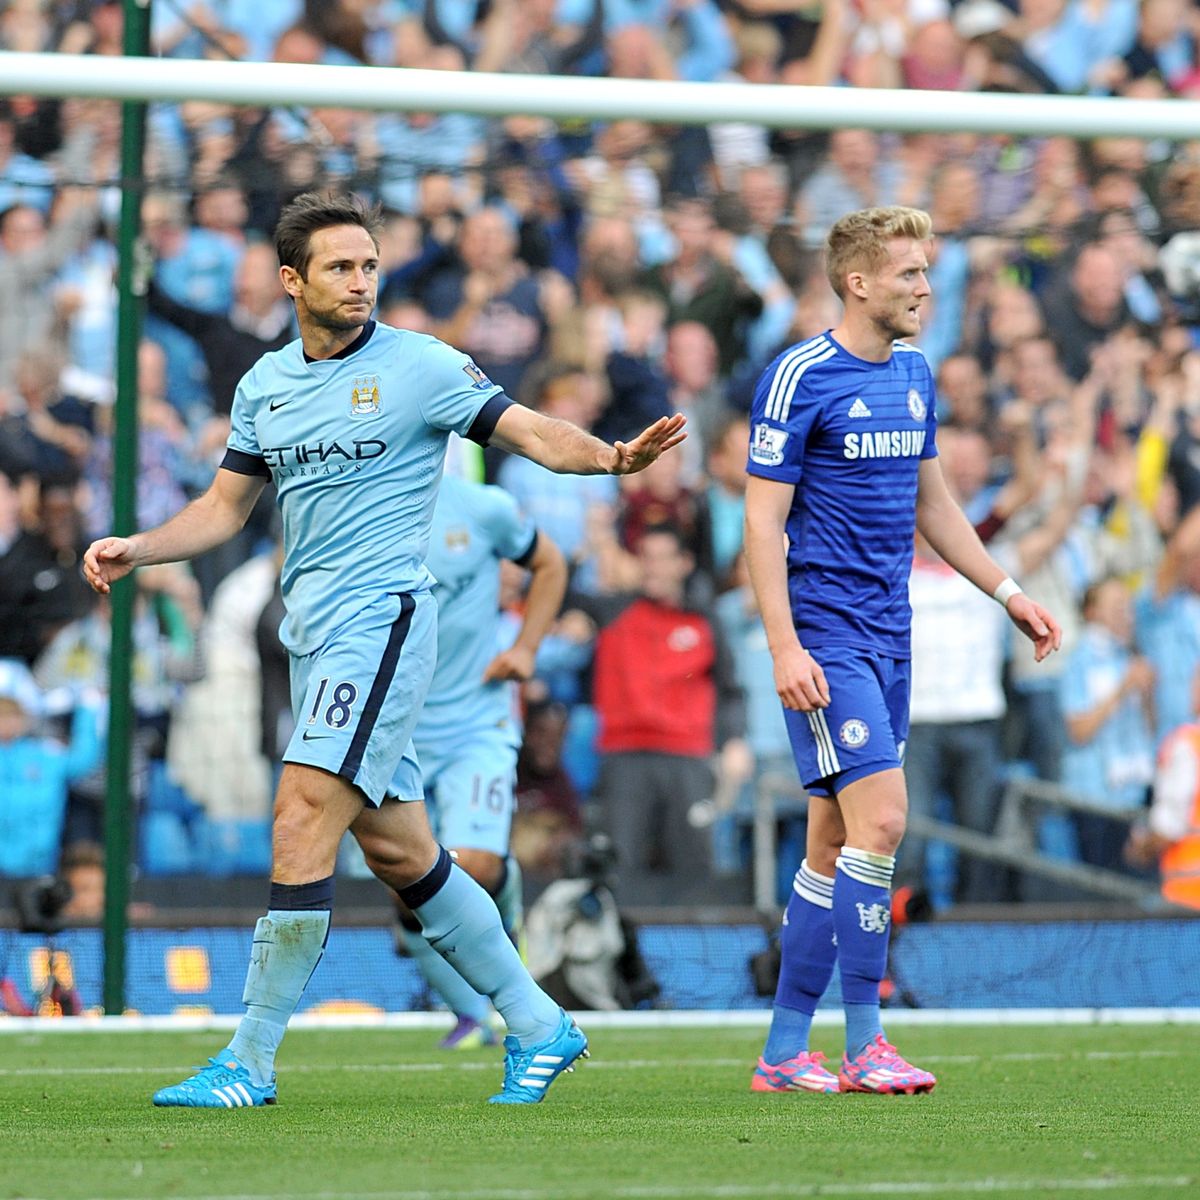 lampard-denying-to-celebrate-a-goal-against-his-former-club-chelsea